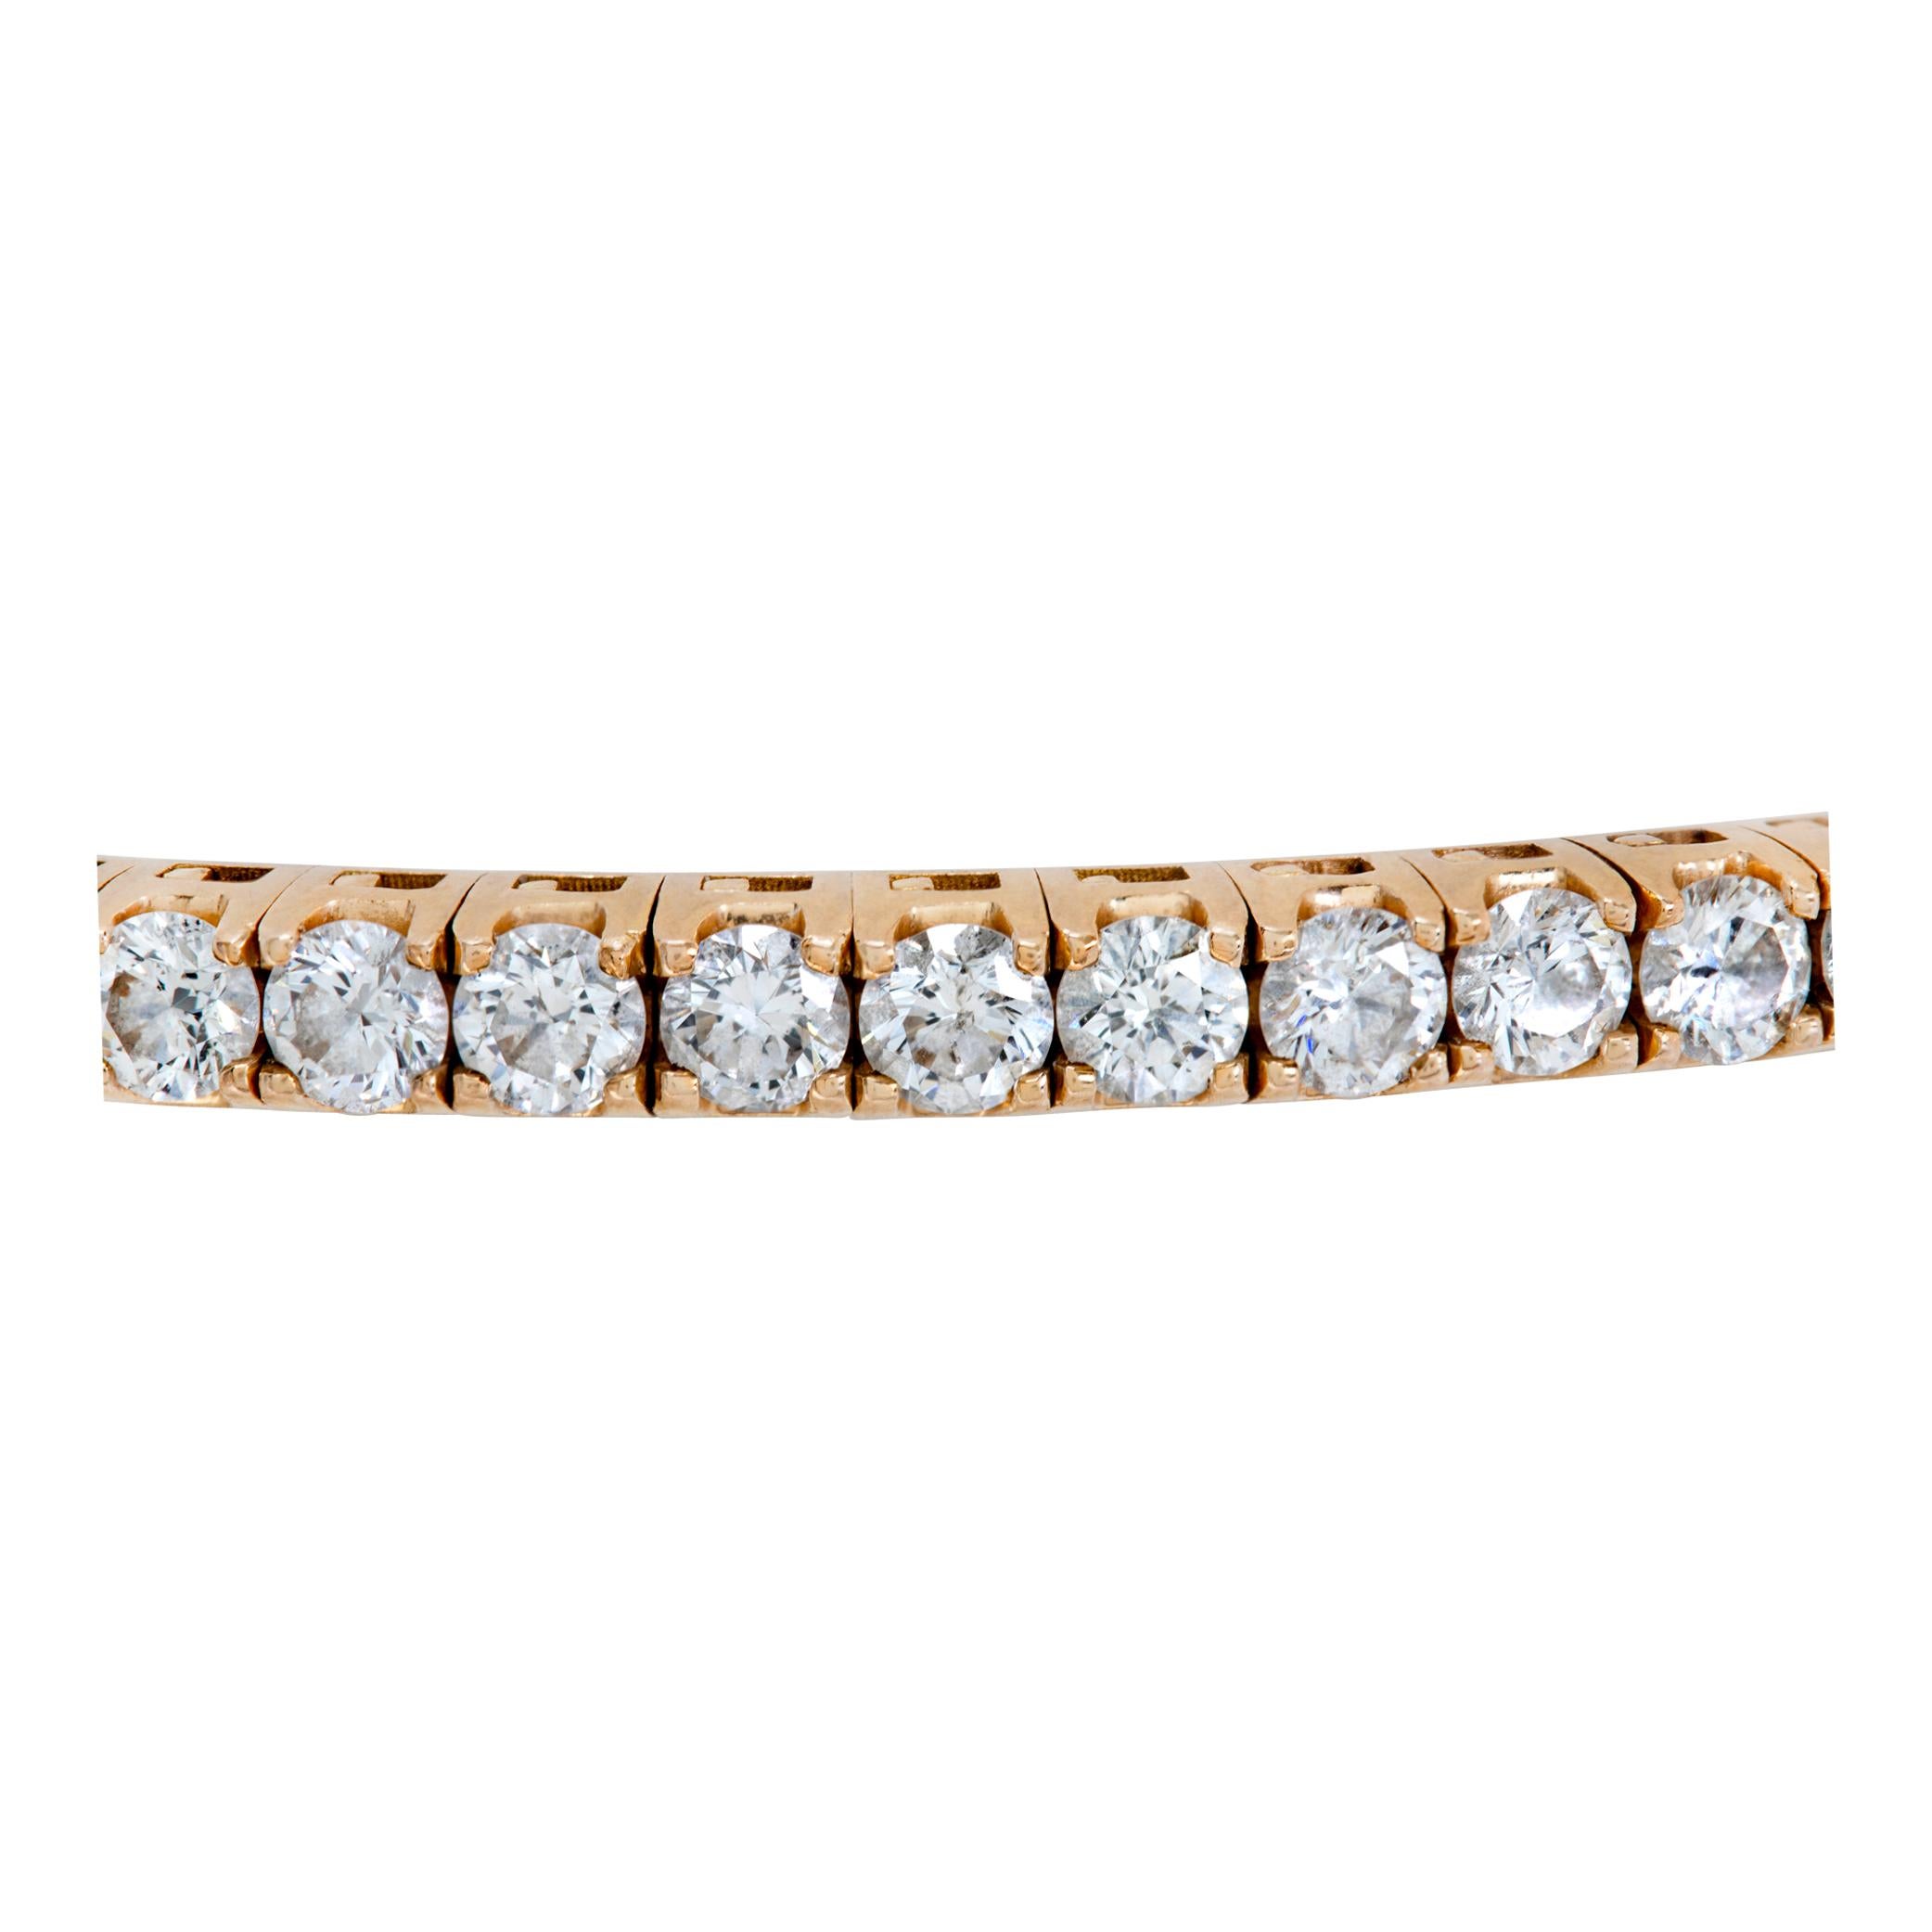 Round brilliant cut diamonds flexible bangle bracelet in 18K rose gold. Round brilliant cut diamonds total approx. weight over 6.00 carats, estimate: G-H color, VS-SI clarity. 1/8 inch wide. Will fit up to a 6.5